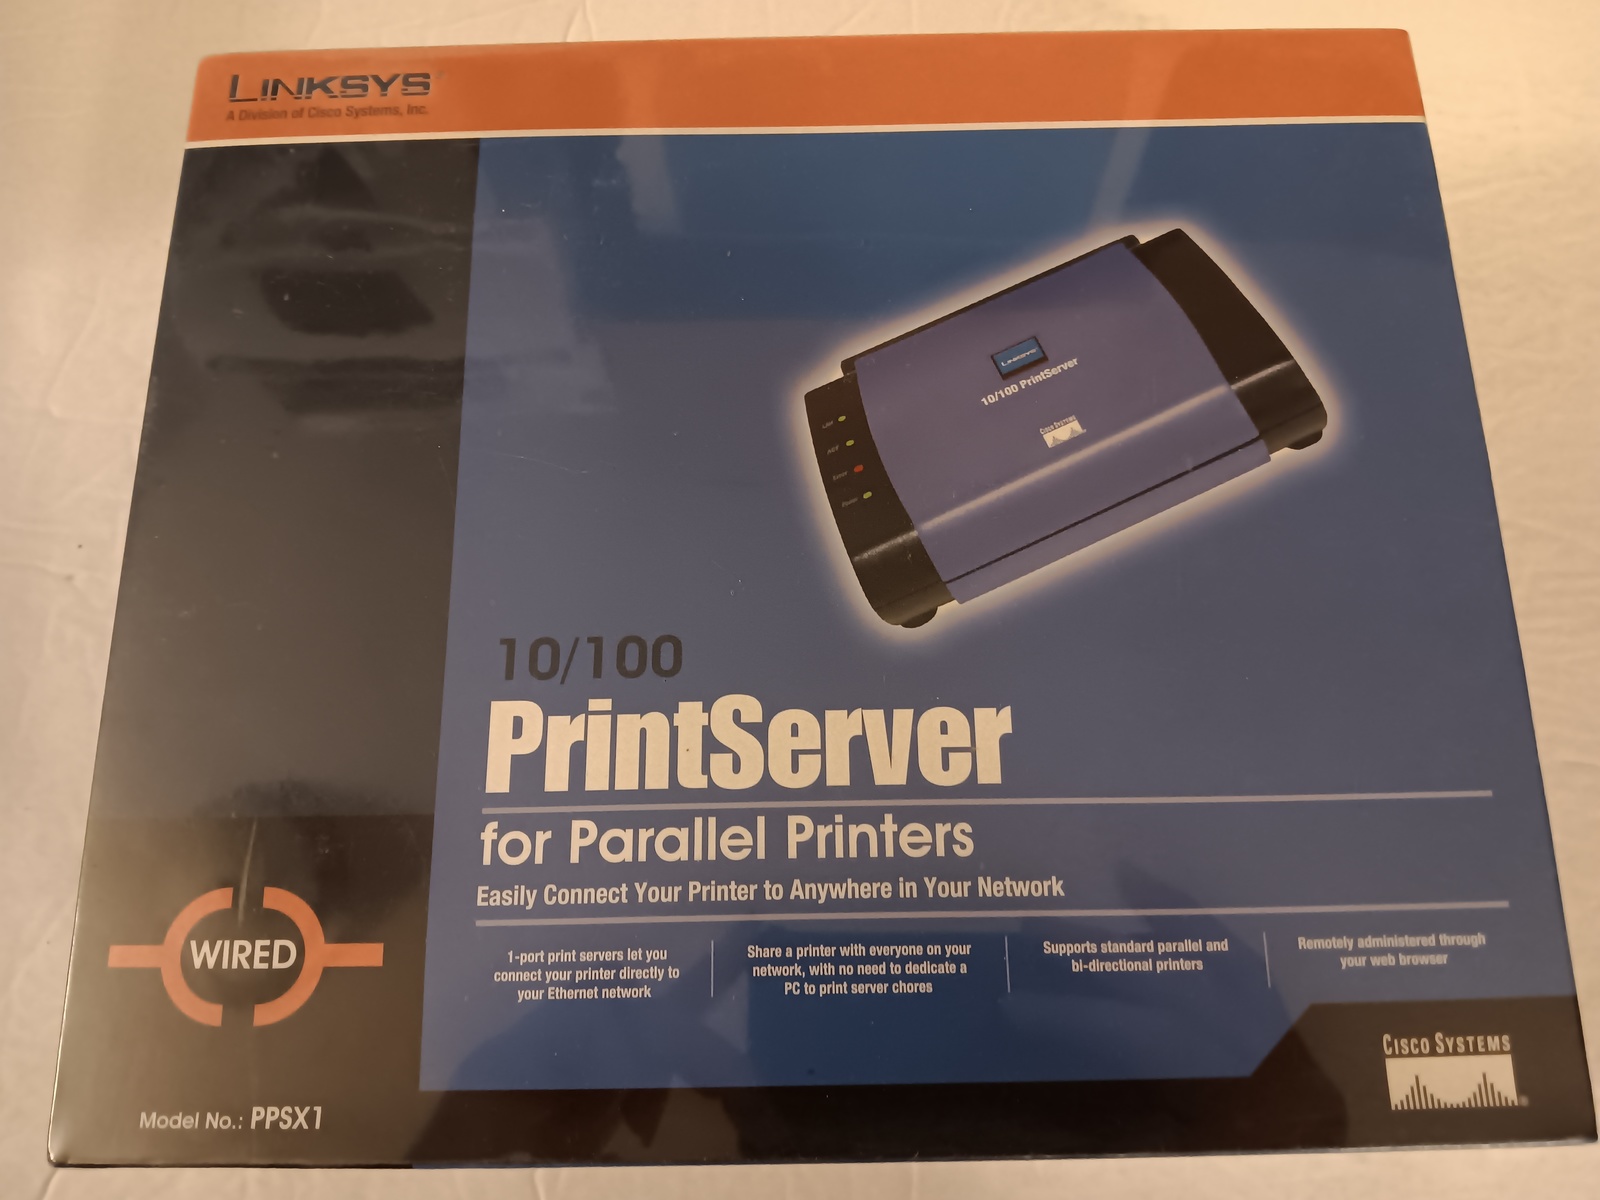 Cisco-Linksys PPSX1 EtherFast 10/100 1-Port Print Server For Parallel Printers  - $74.99